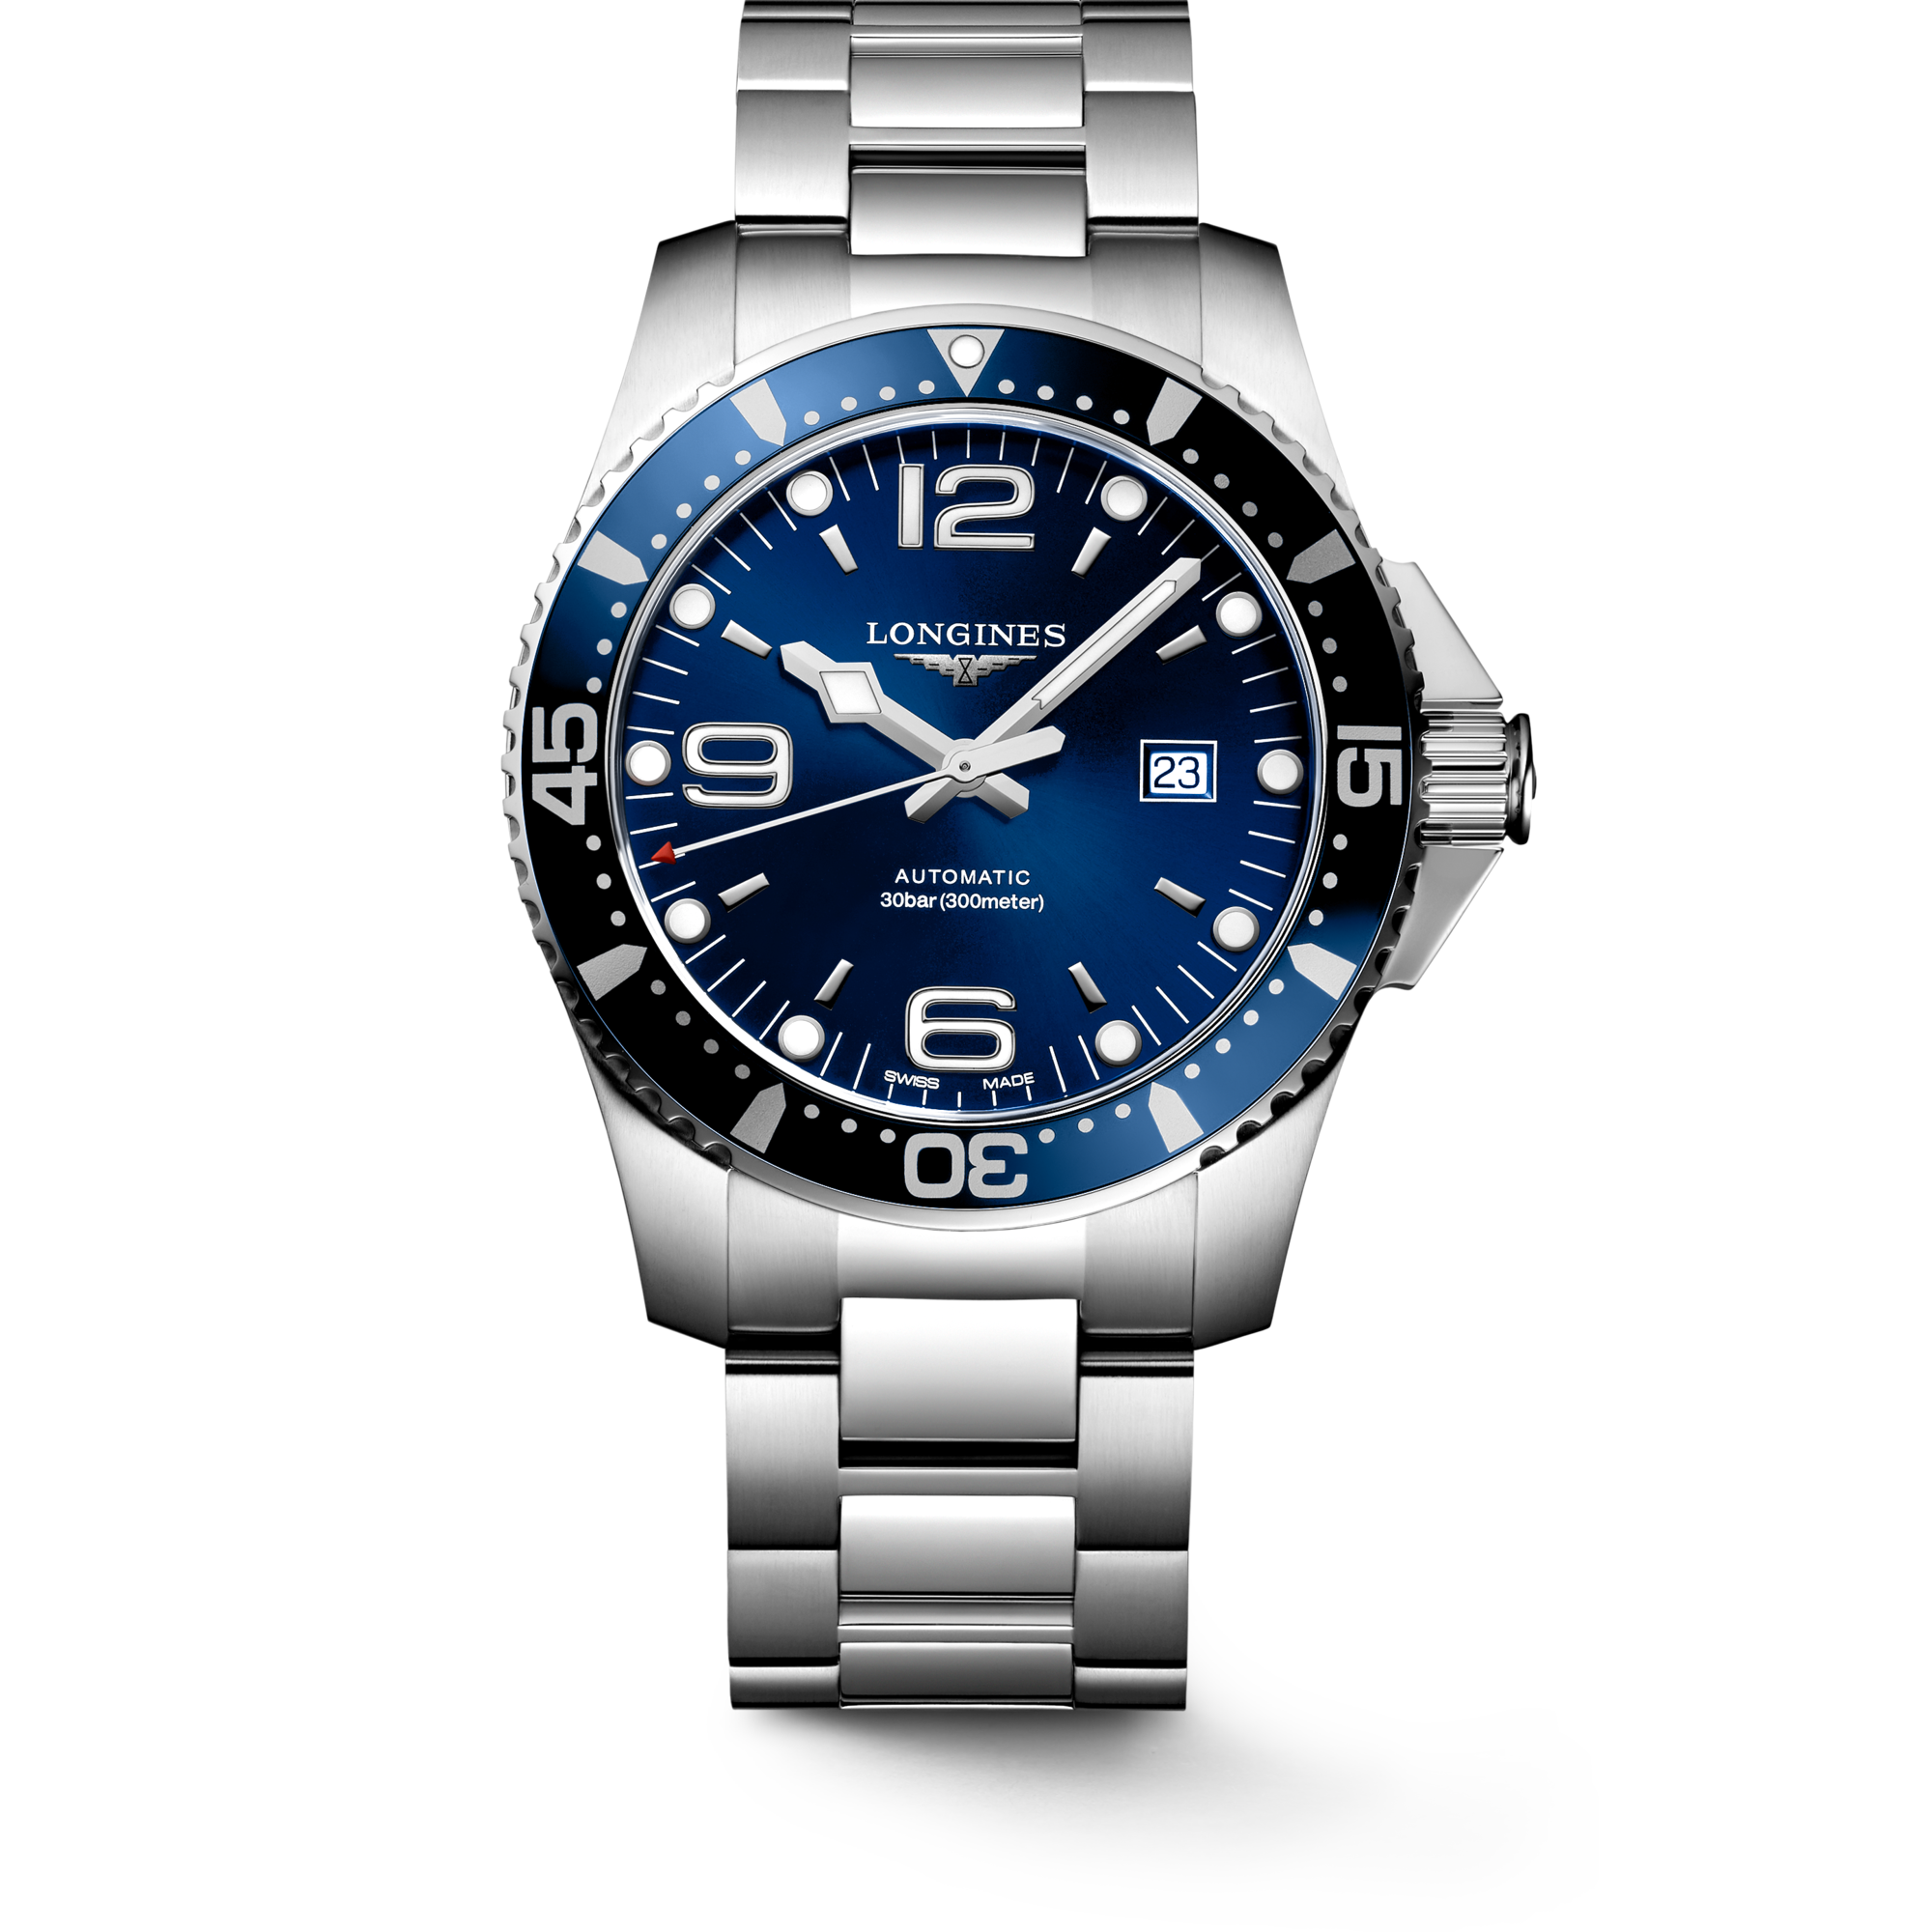 Longines Longines Hydro Conquest 32mm 001-579-00102, Aires Jewelers